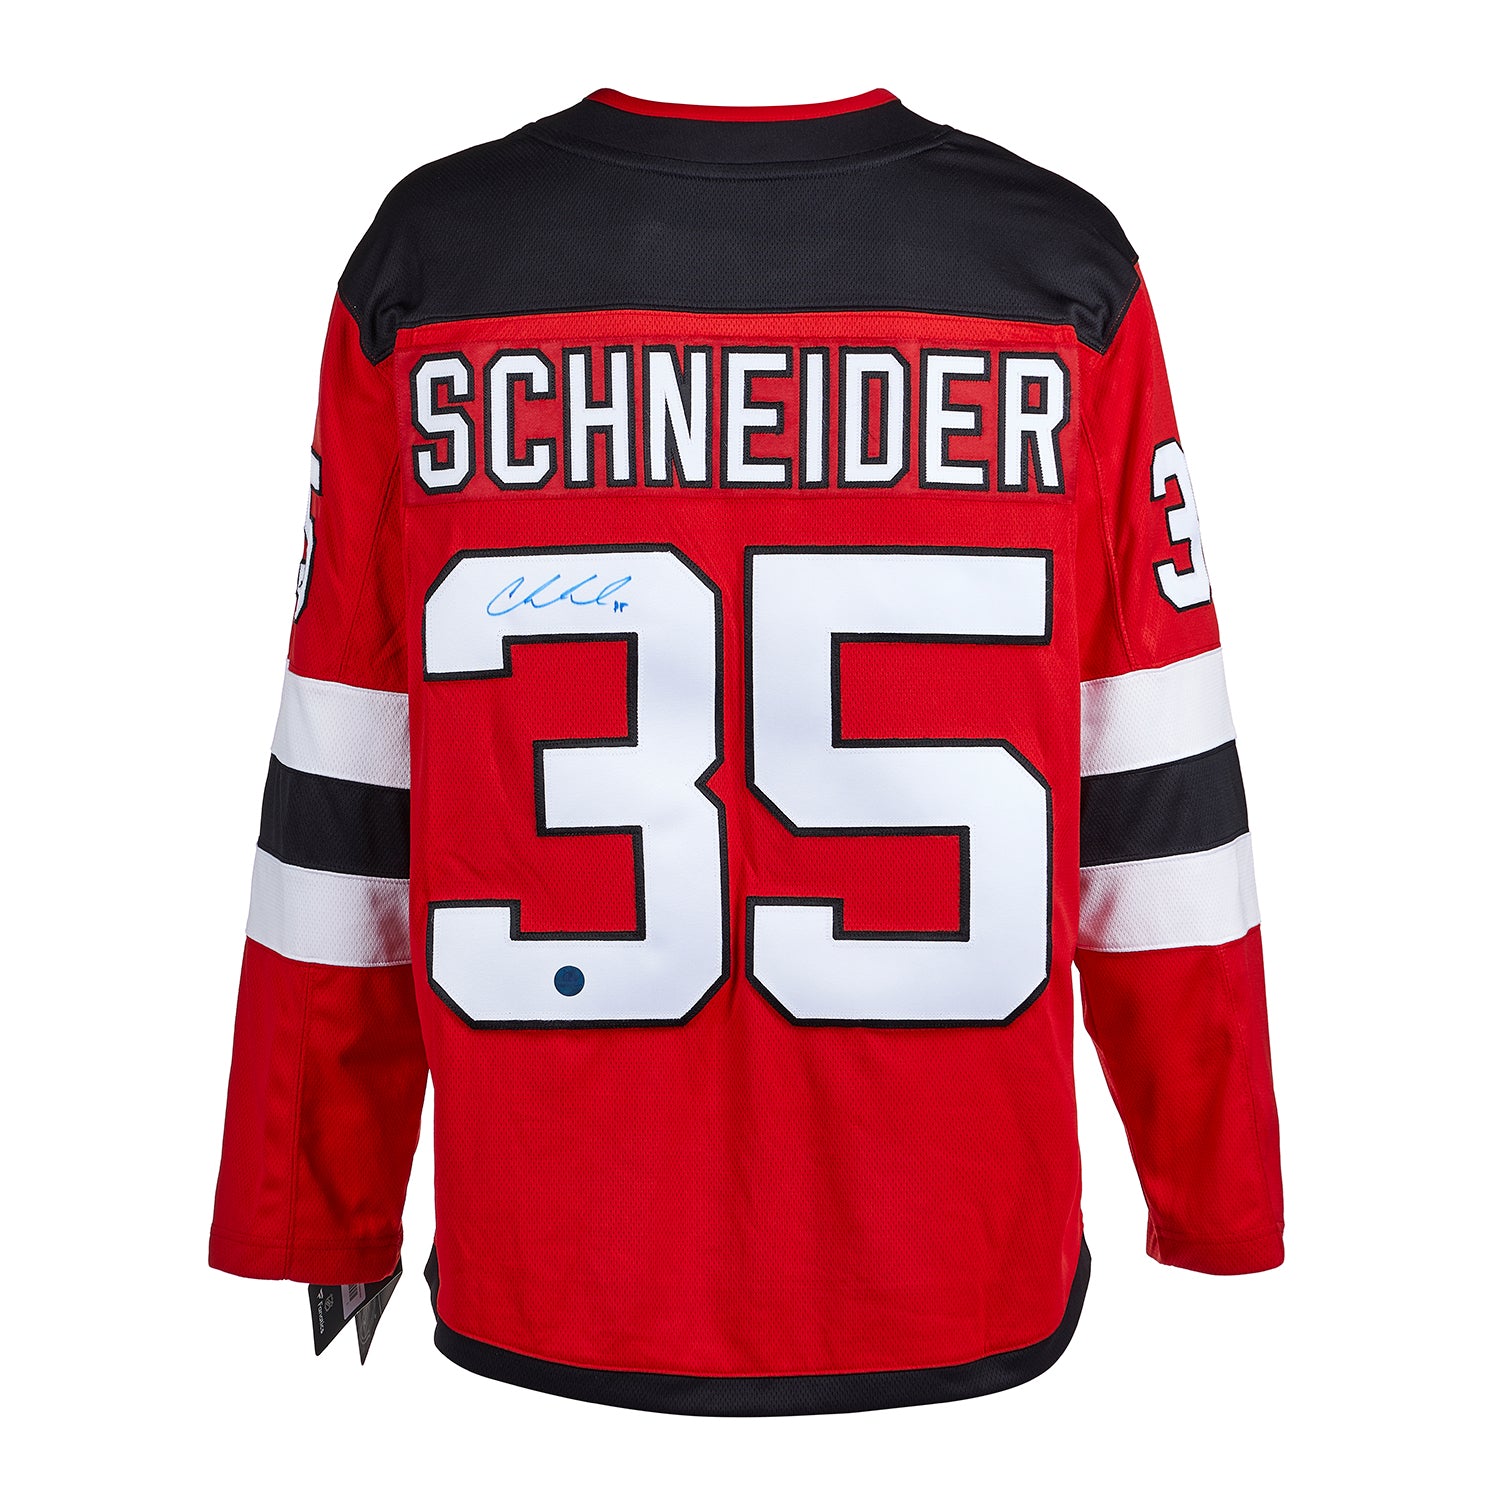 Cory Schneider New Jersey Devils Autographed Adidas Jersey